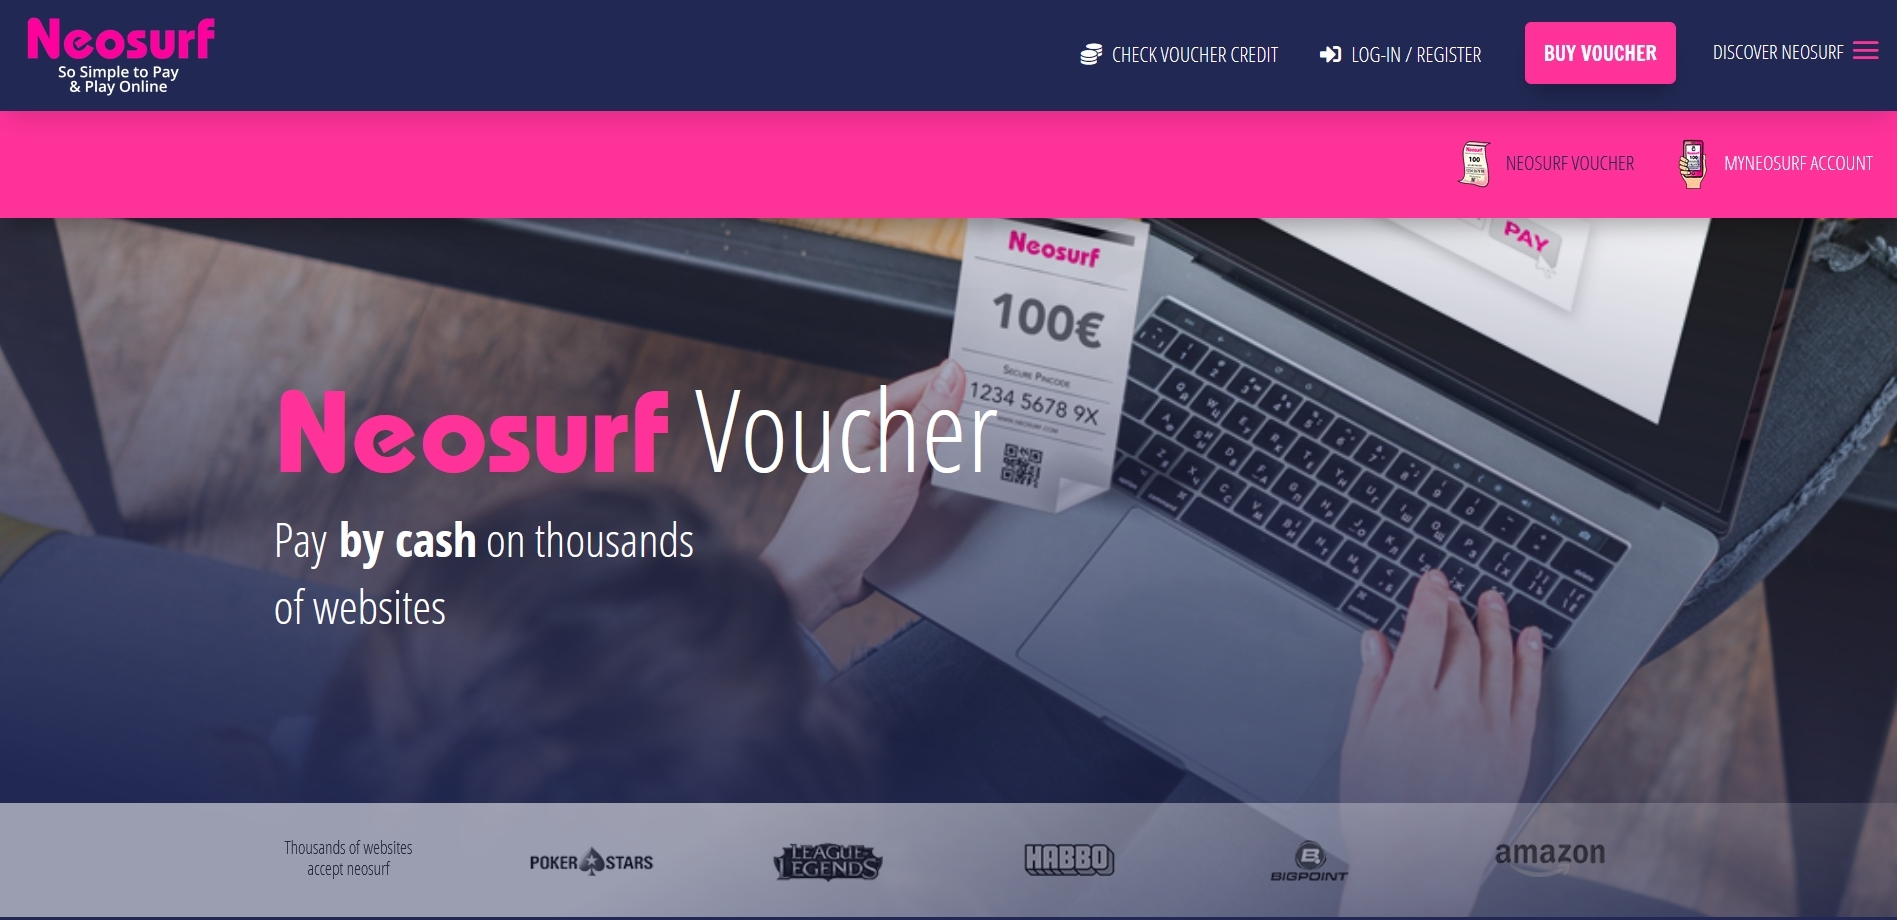 Neosurf €5 Gift Card BE 6.77$